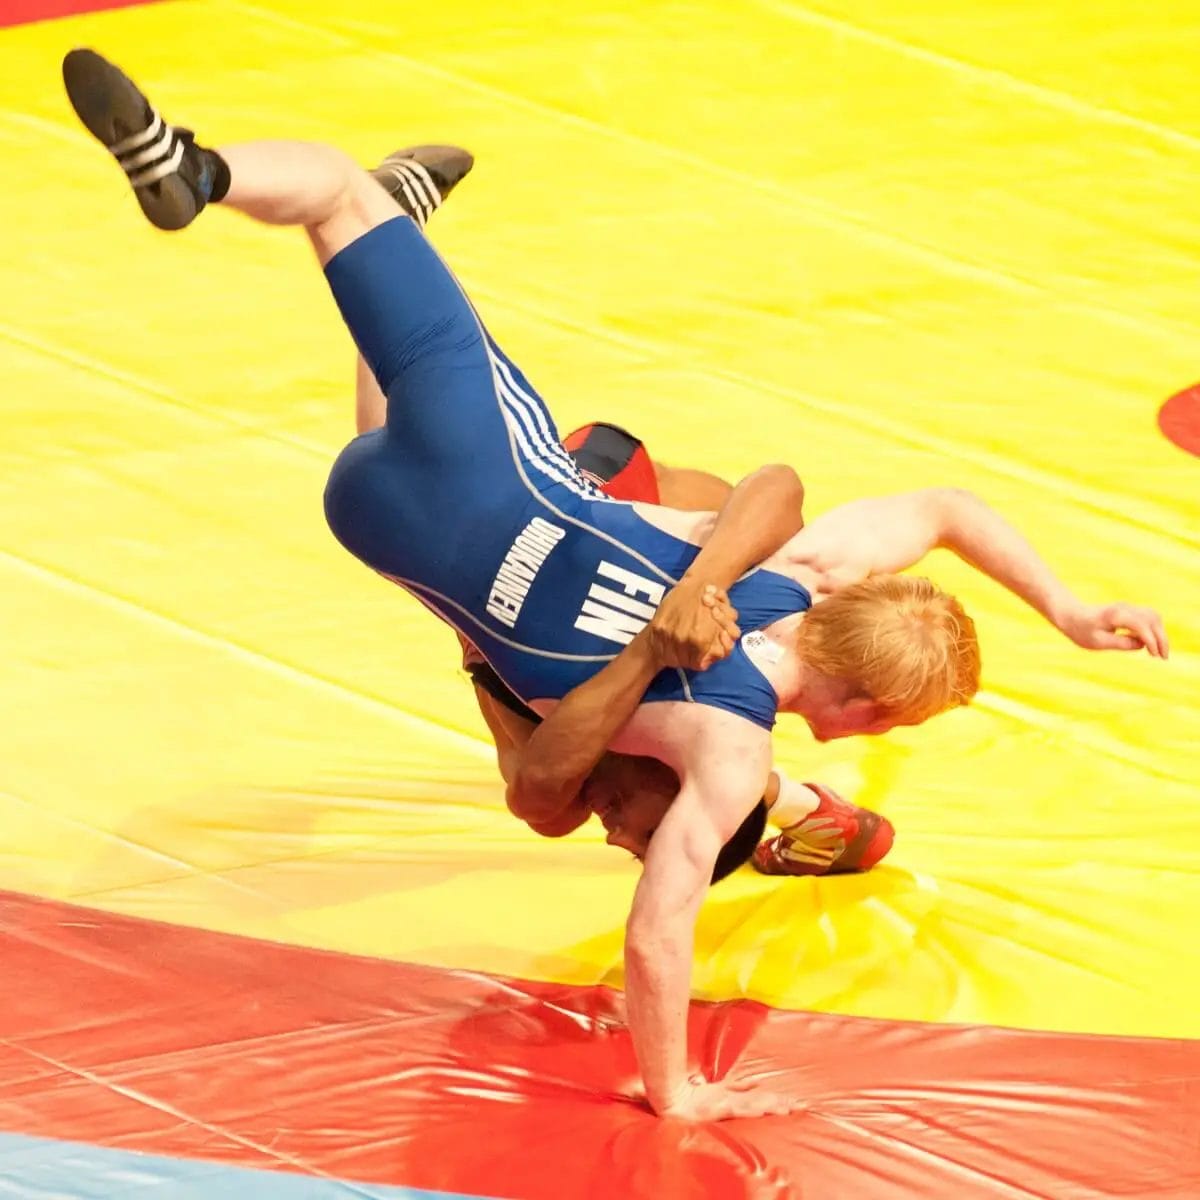 Olympic wrestling image of Finland wrestler wearing adidas shoes.